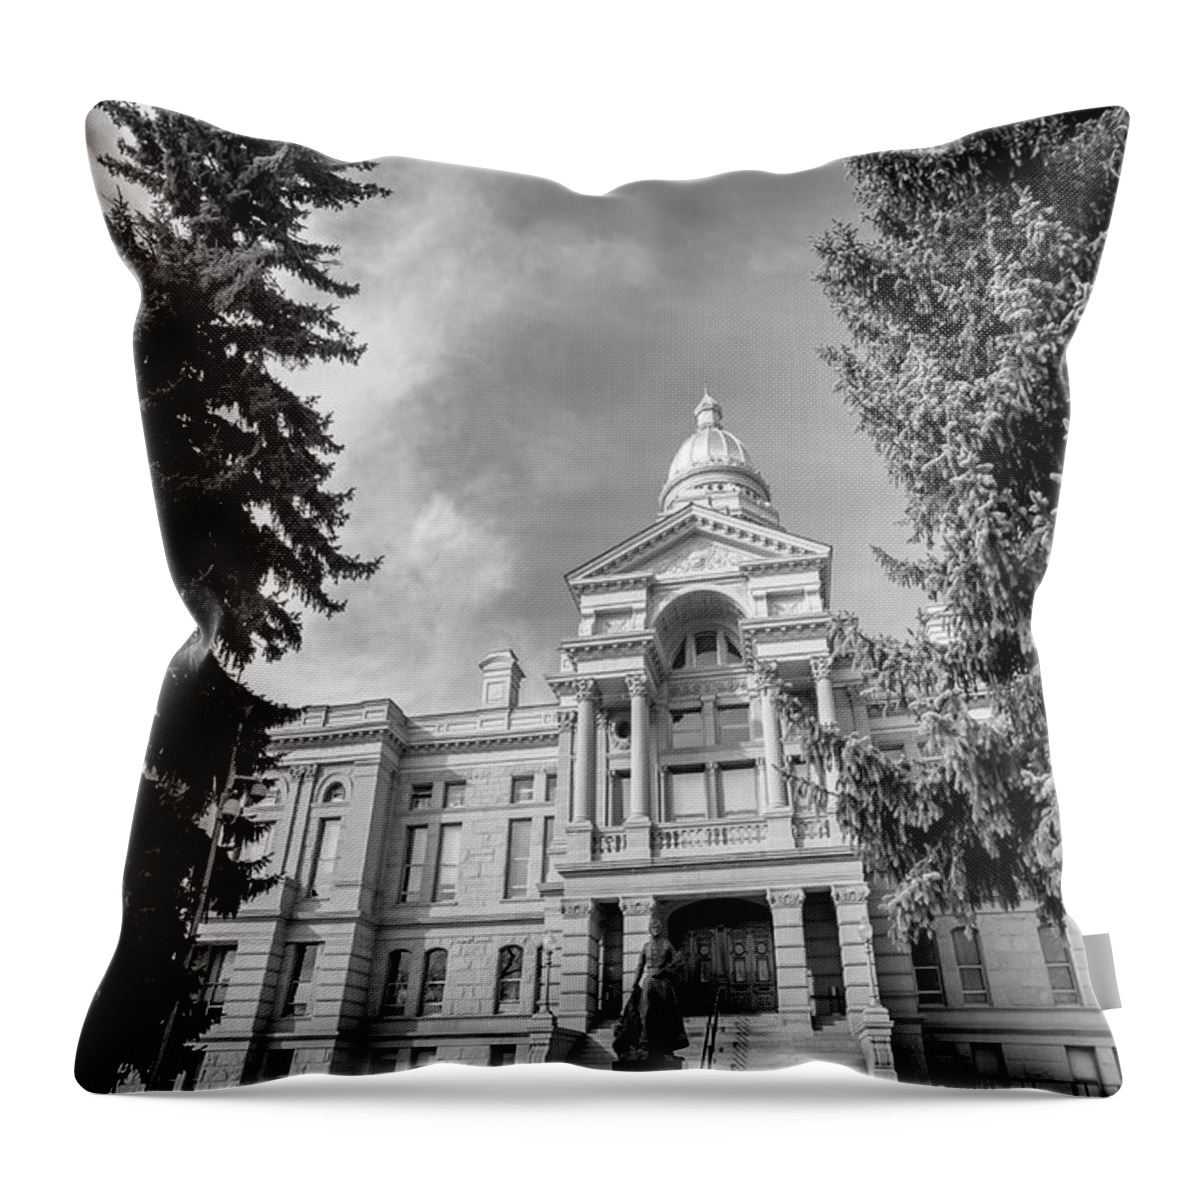 Cheyenne Wyoming Throw Pillow featuring the photograph Cheyenne Wyoming Capitol Building - Black and White by Gregory Ballos